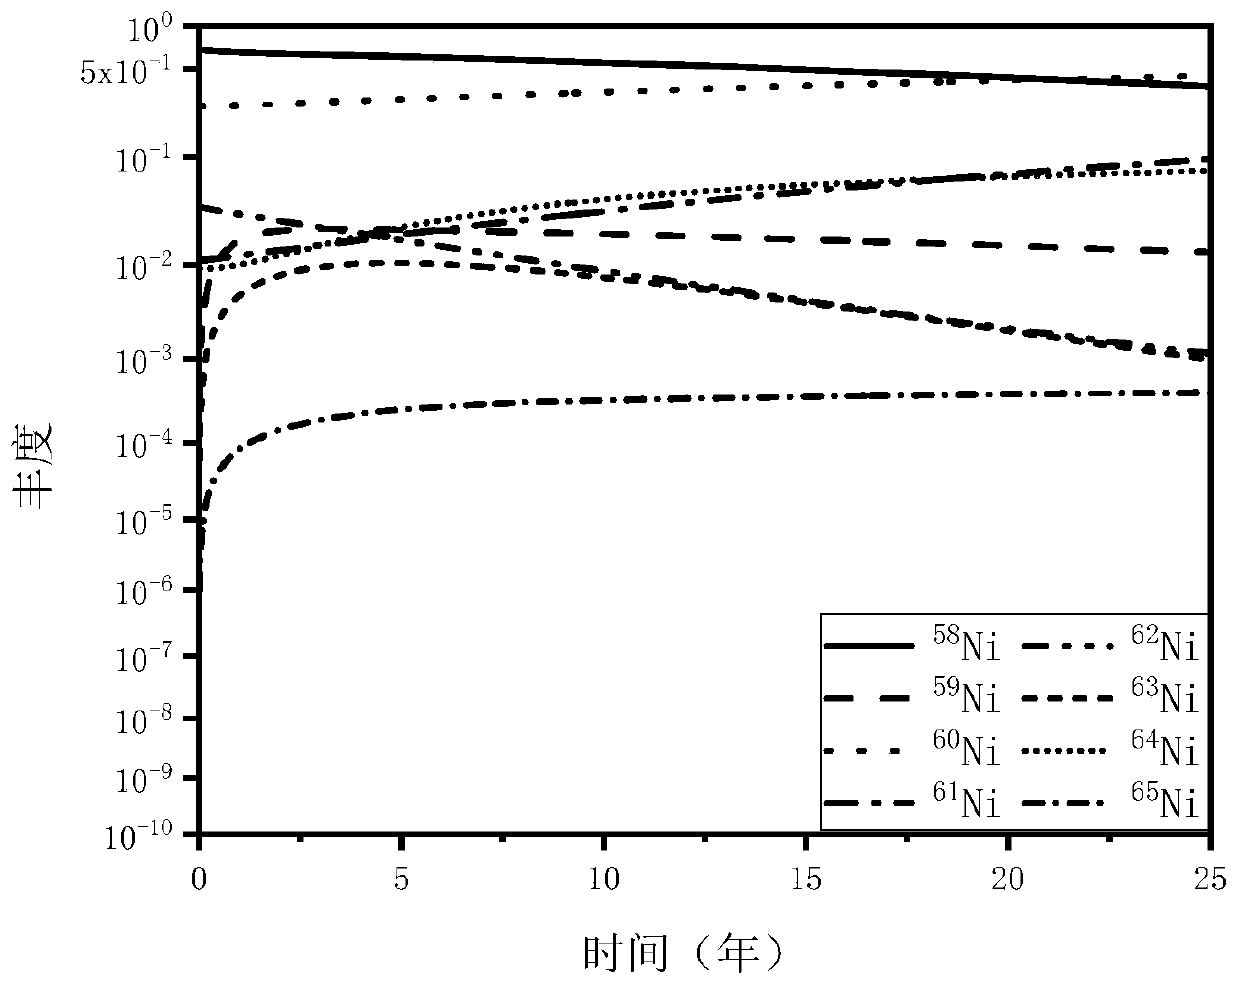 A Method for Estimating Thermal Neutron Flux in Heavy Water Reactor